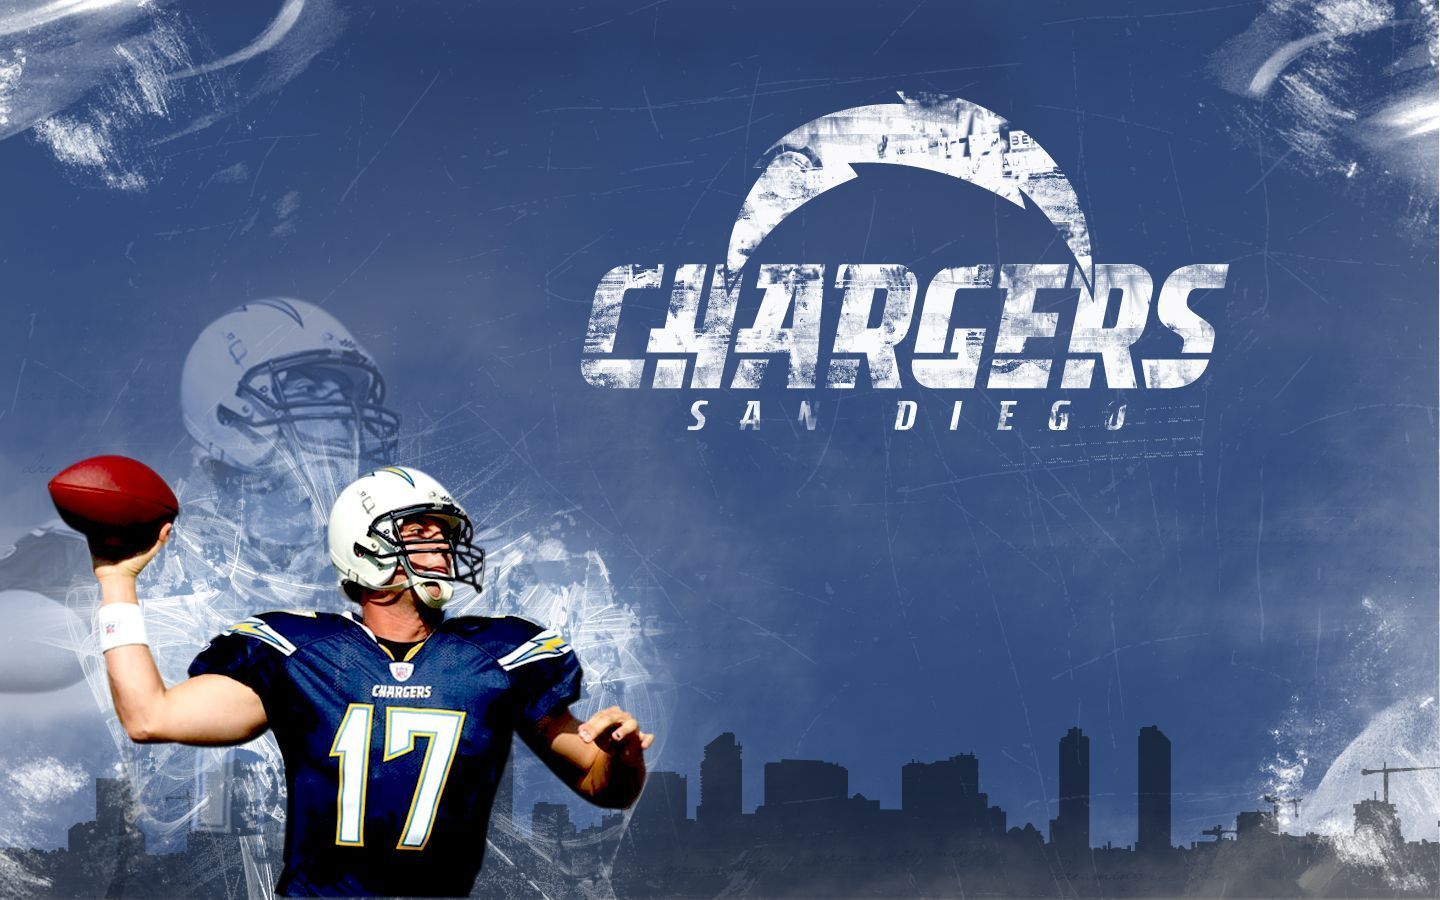 San diego chargers photo san diego chargers wallpaper High resolution